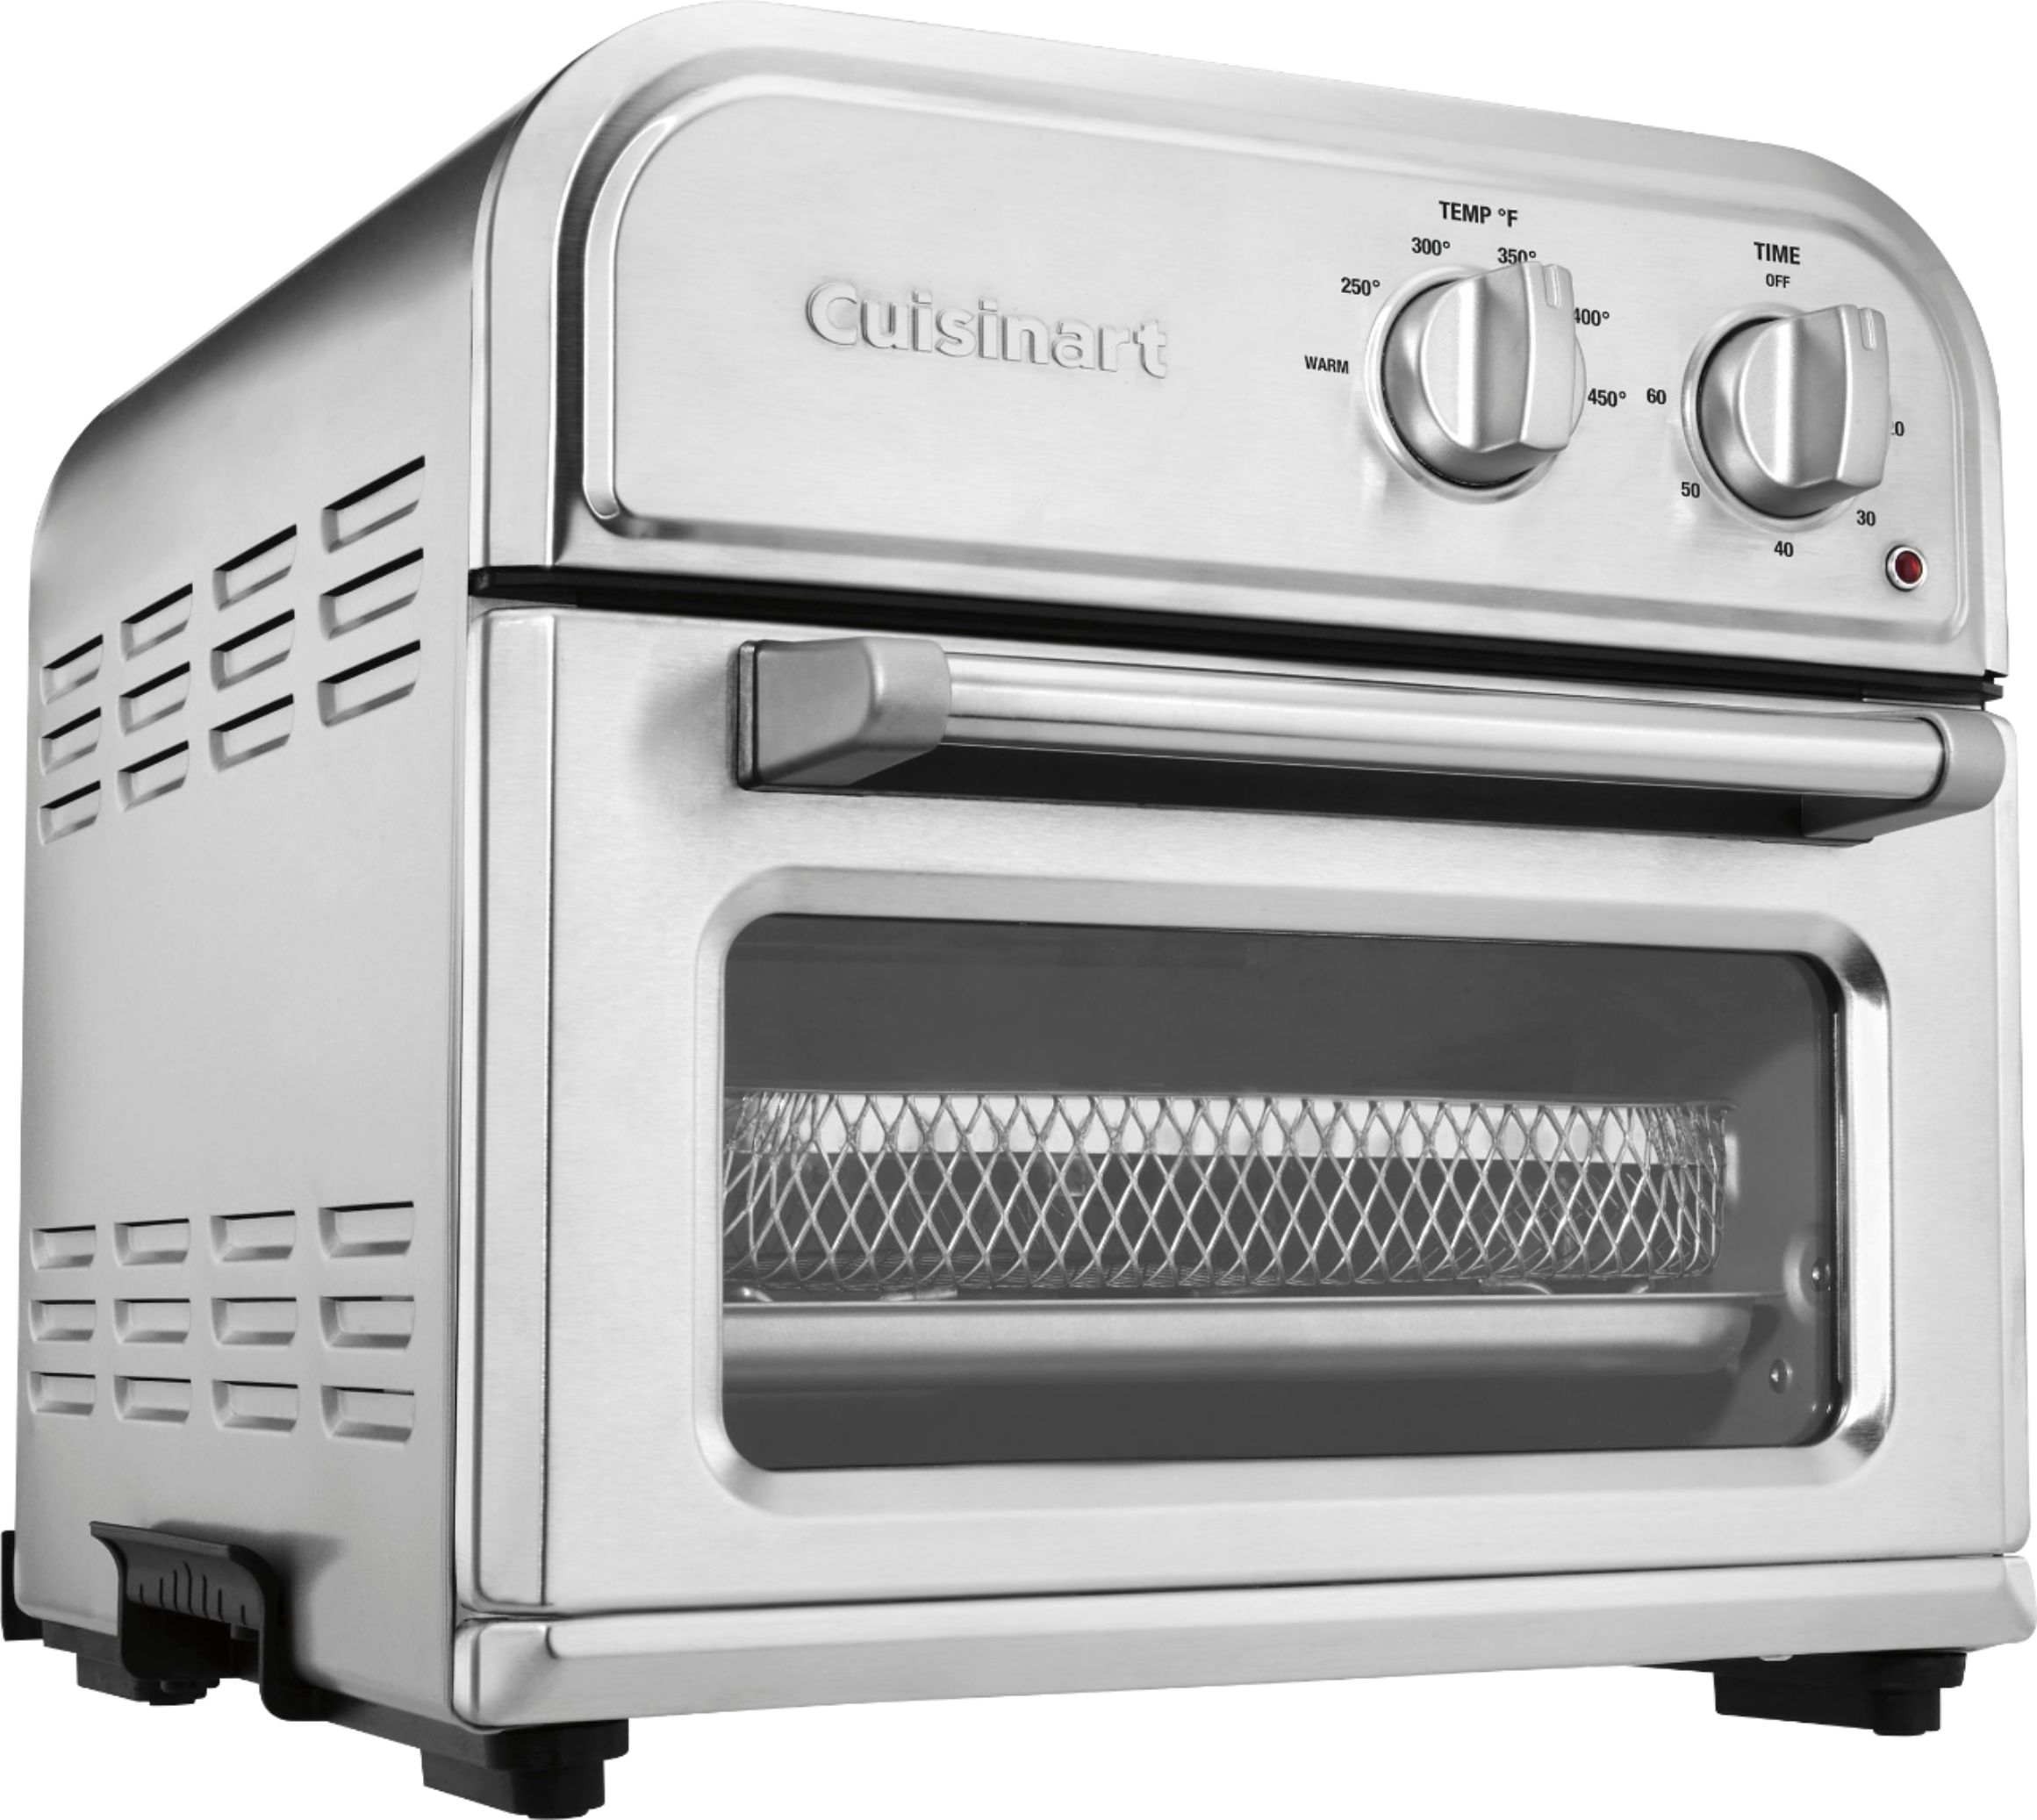 Questions and Answers: Cuisinart Air Fryer Stainless Steel ...